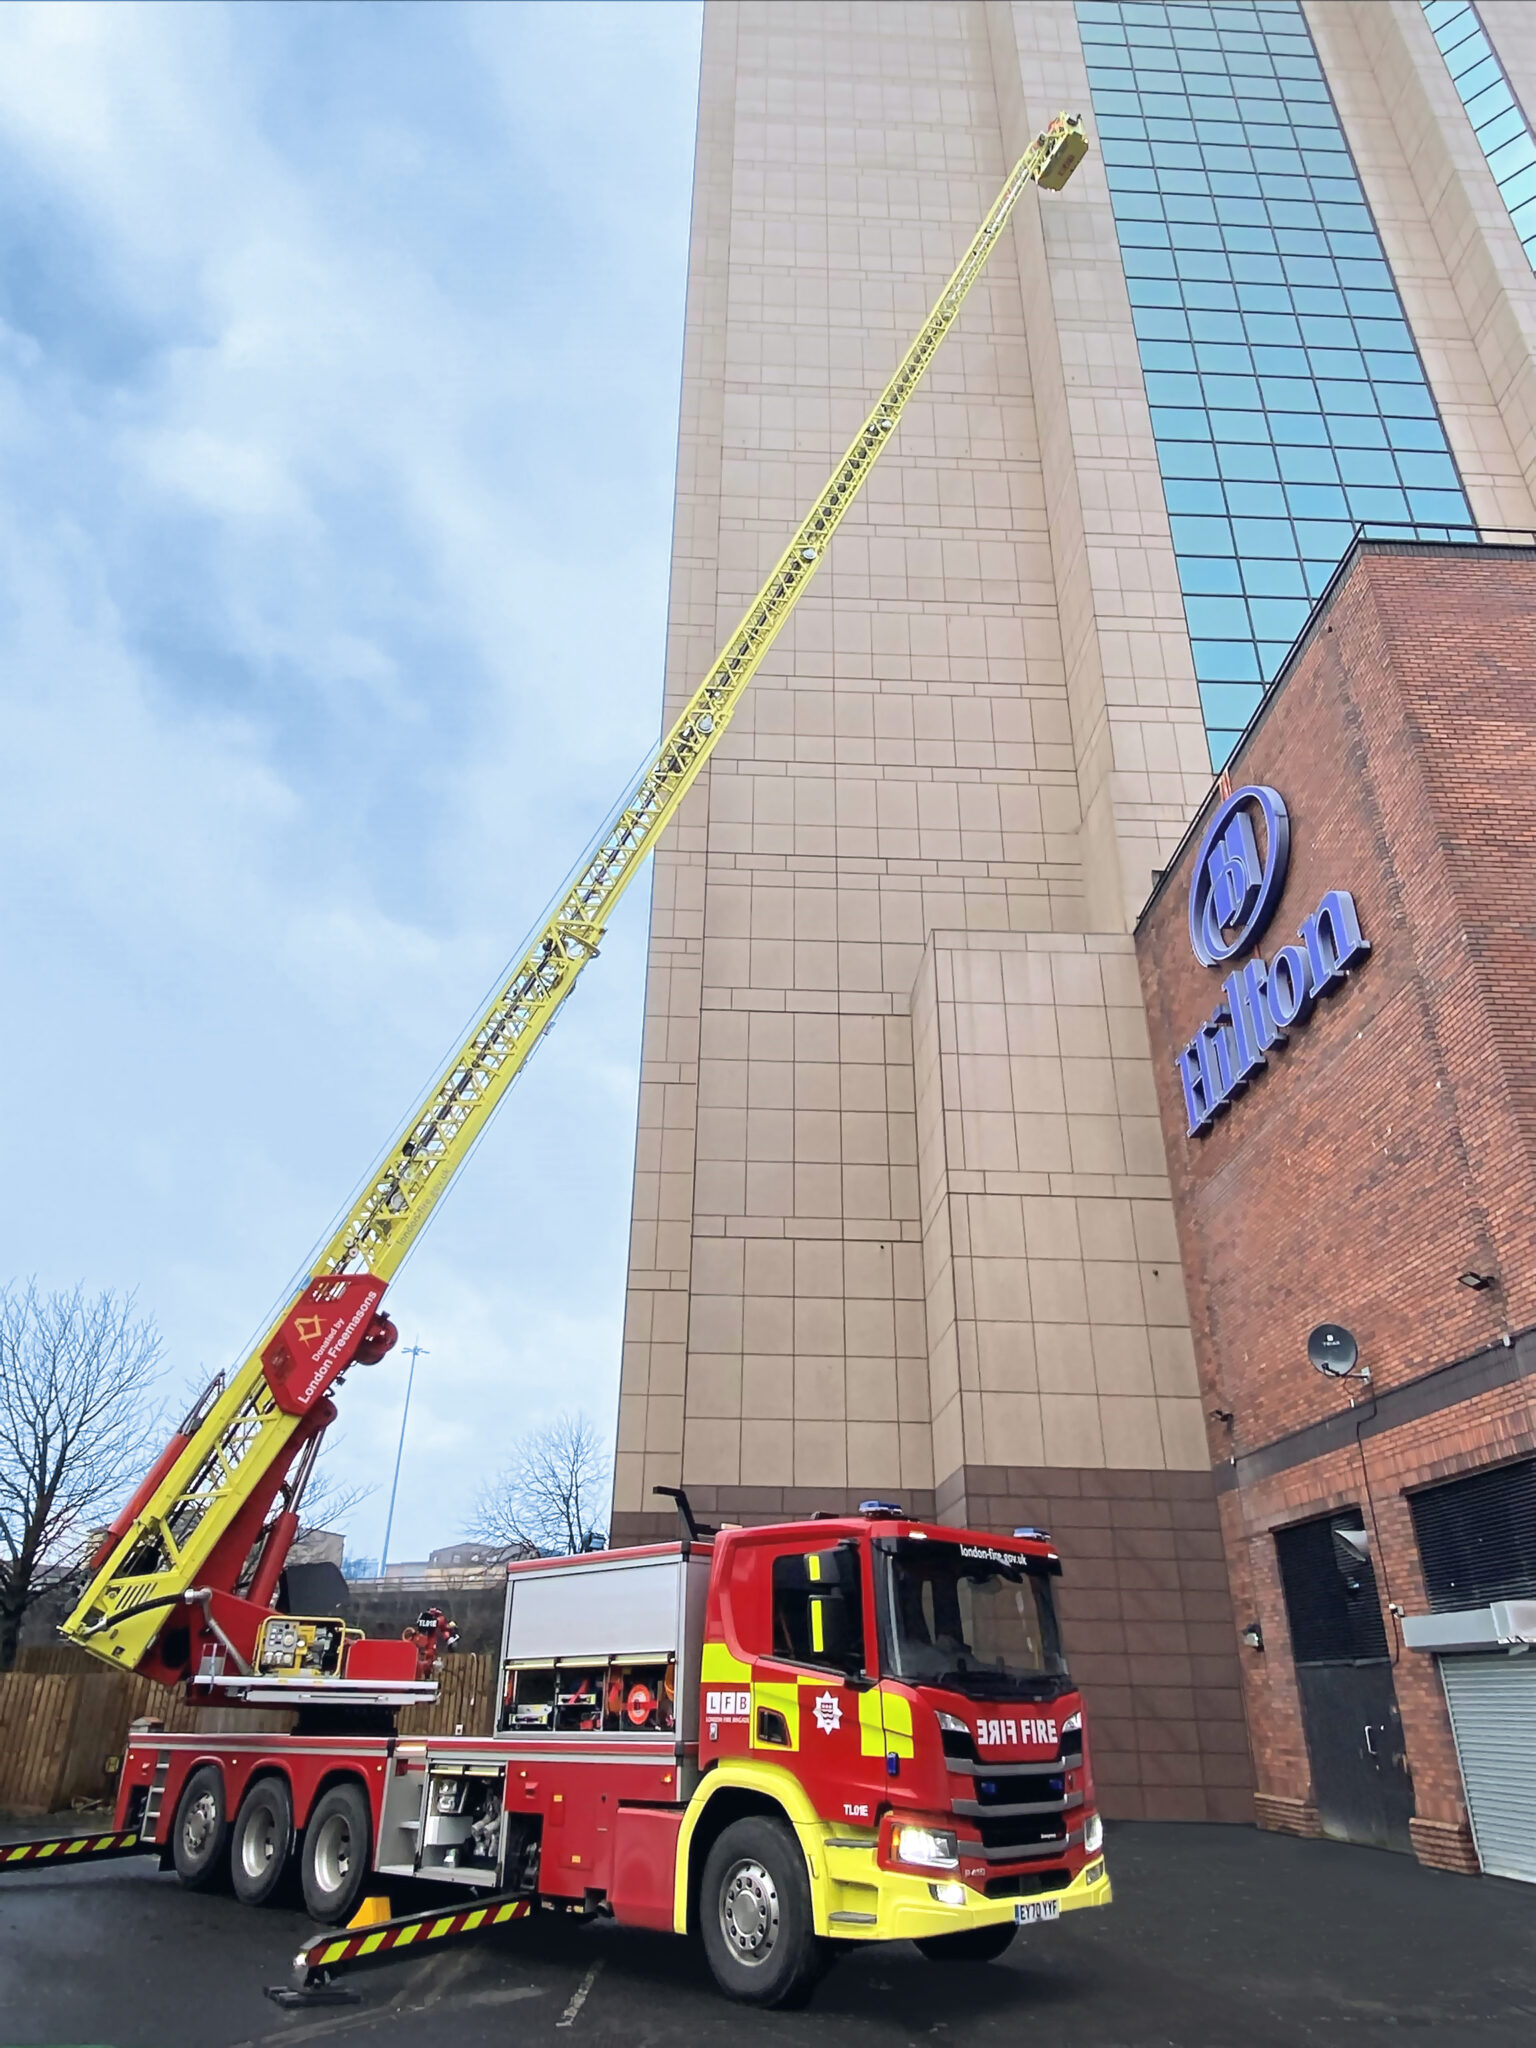 1-ISJ- Magirus supplies London Fire Brigade with Europe's highest turntable ladders